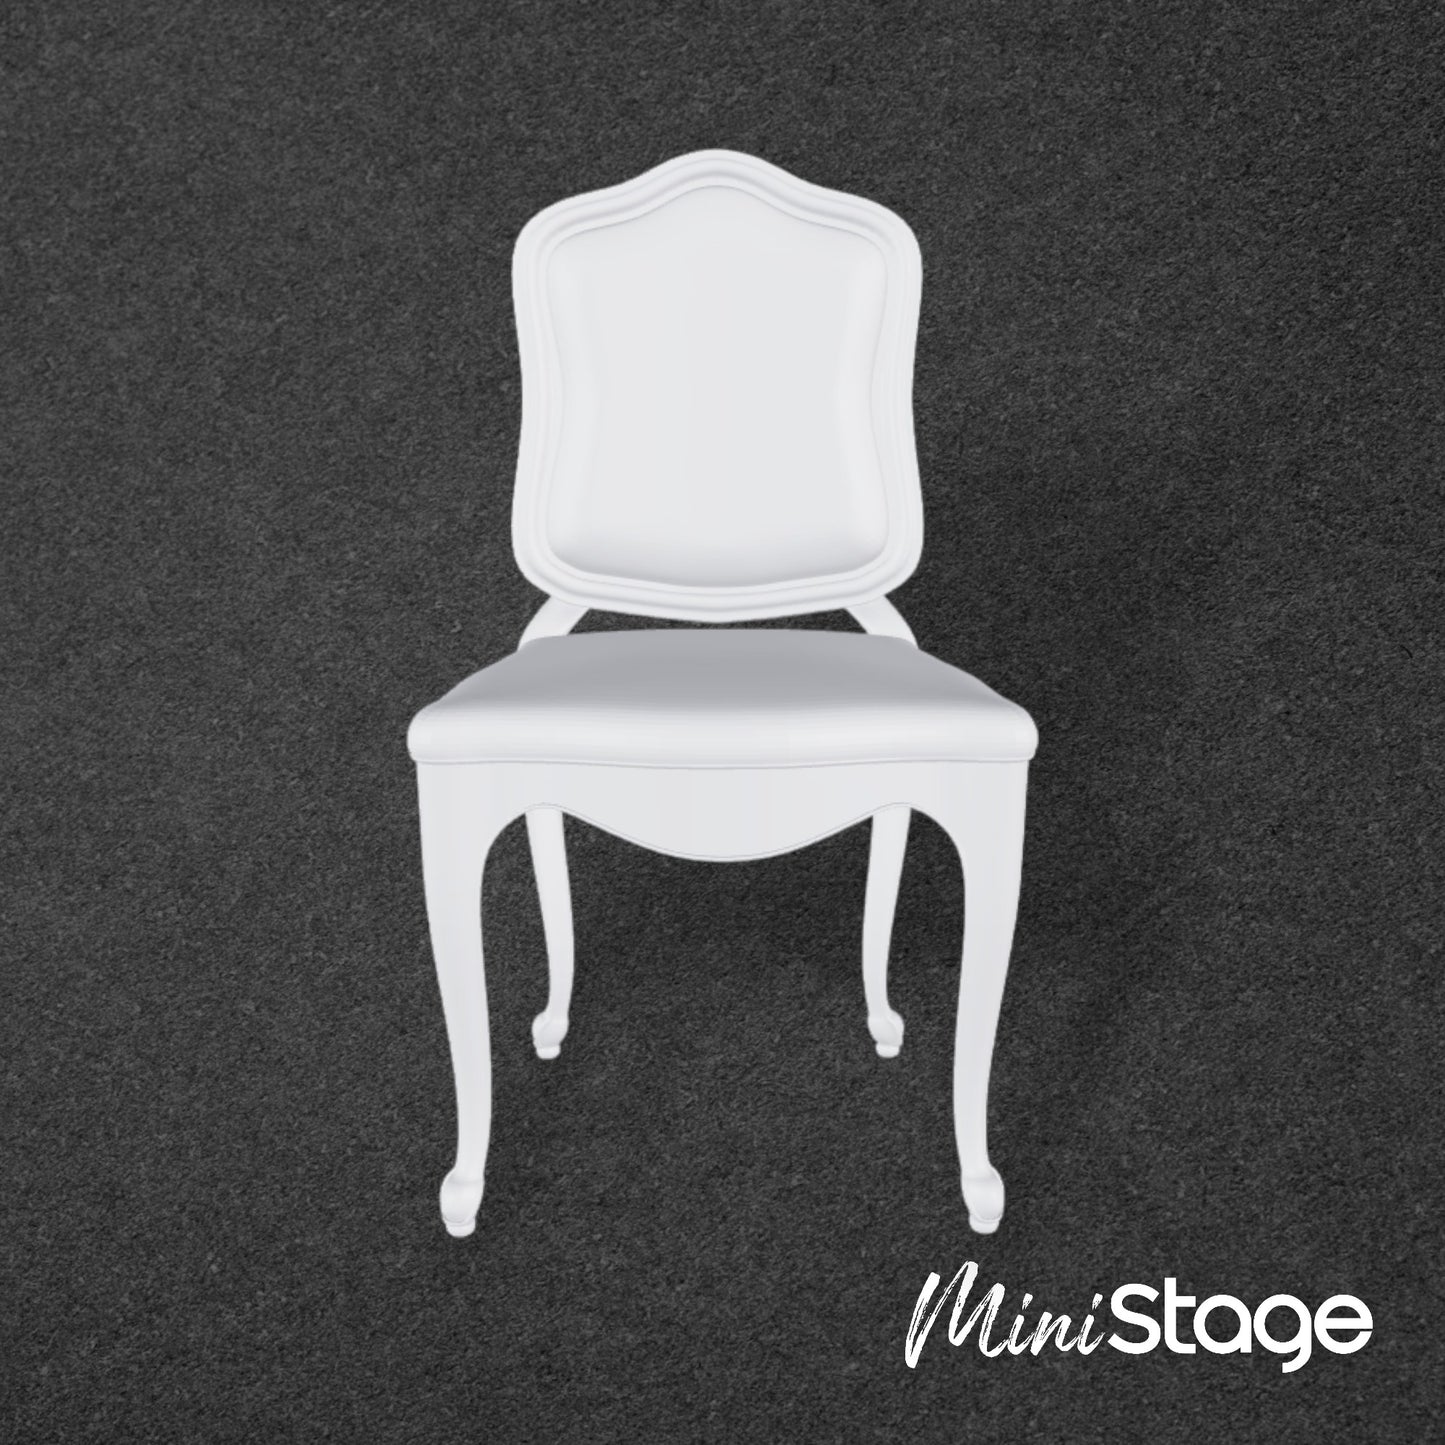 Scale Model of a Formal Dining Chair